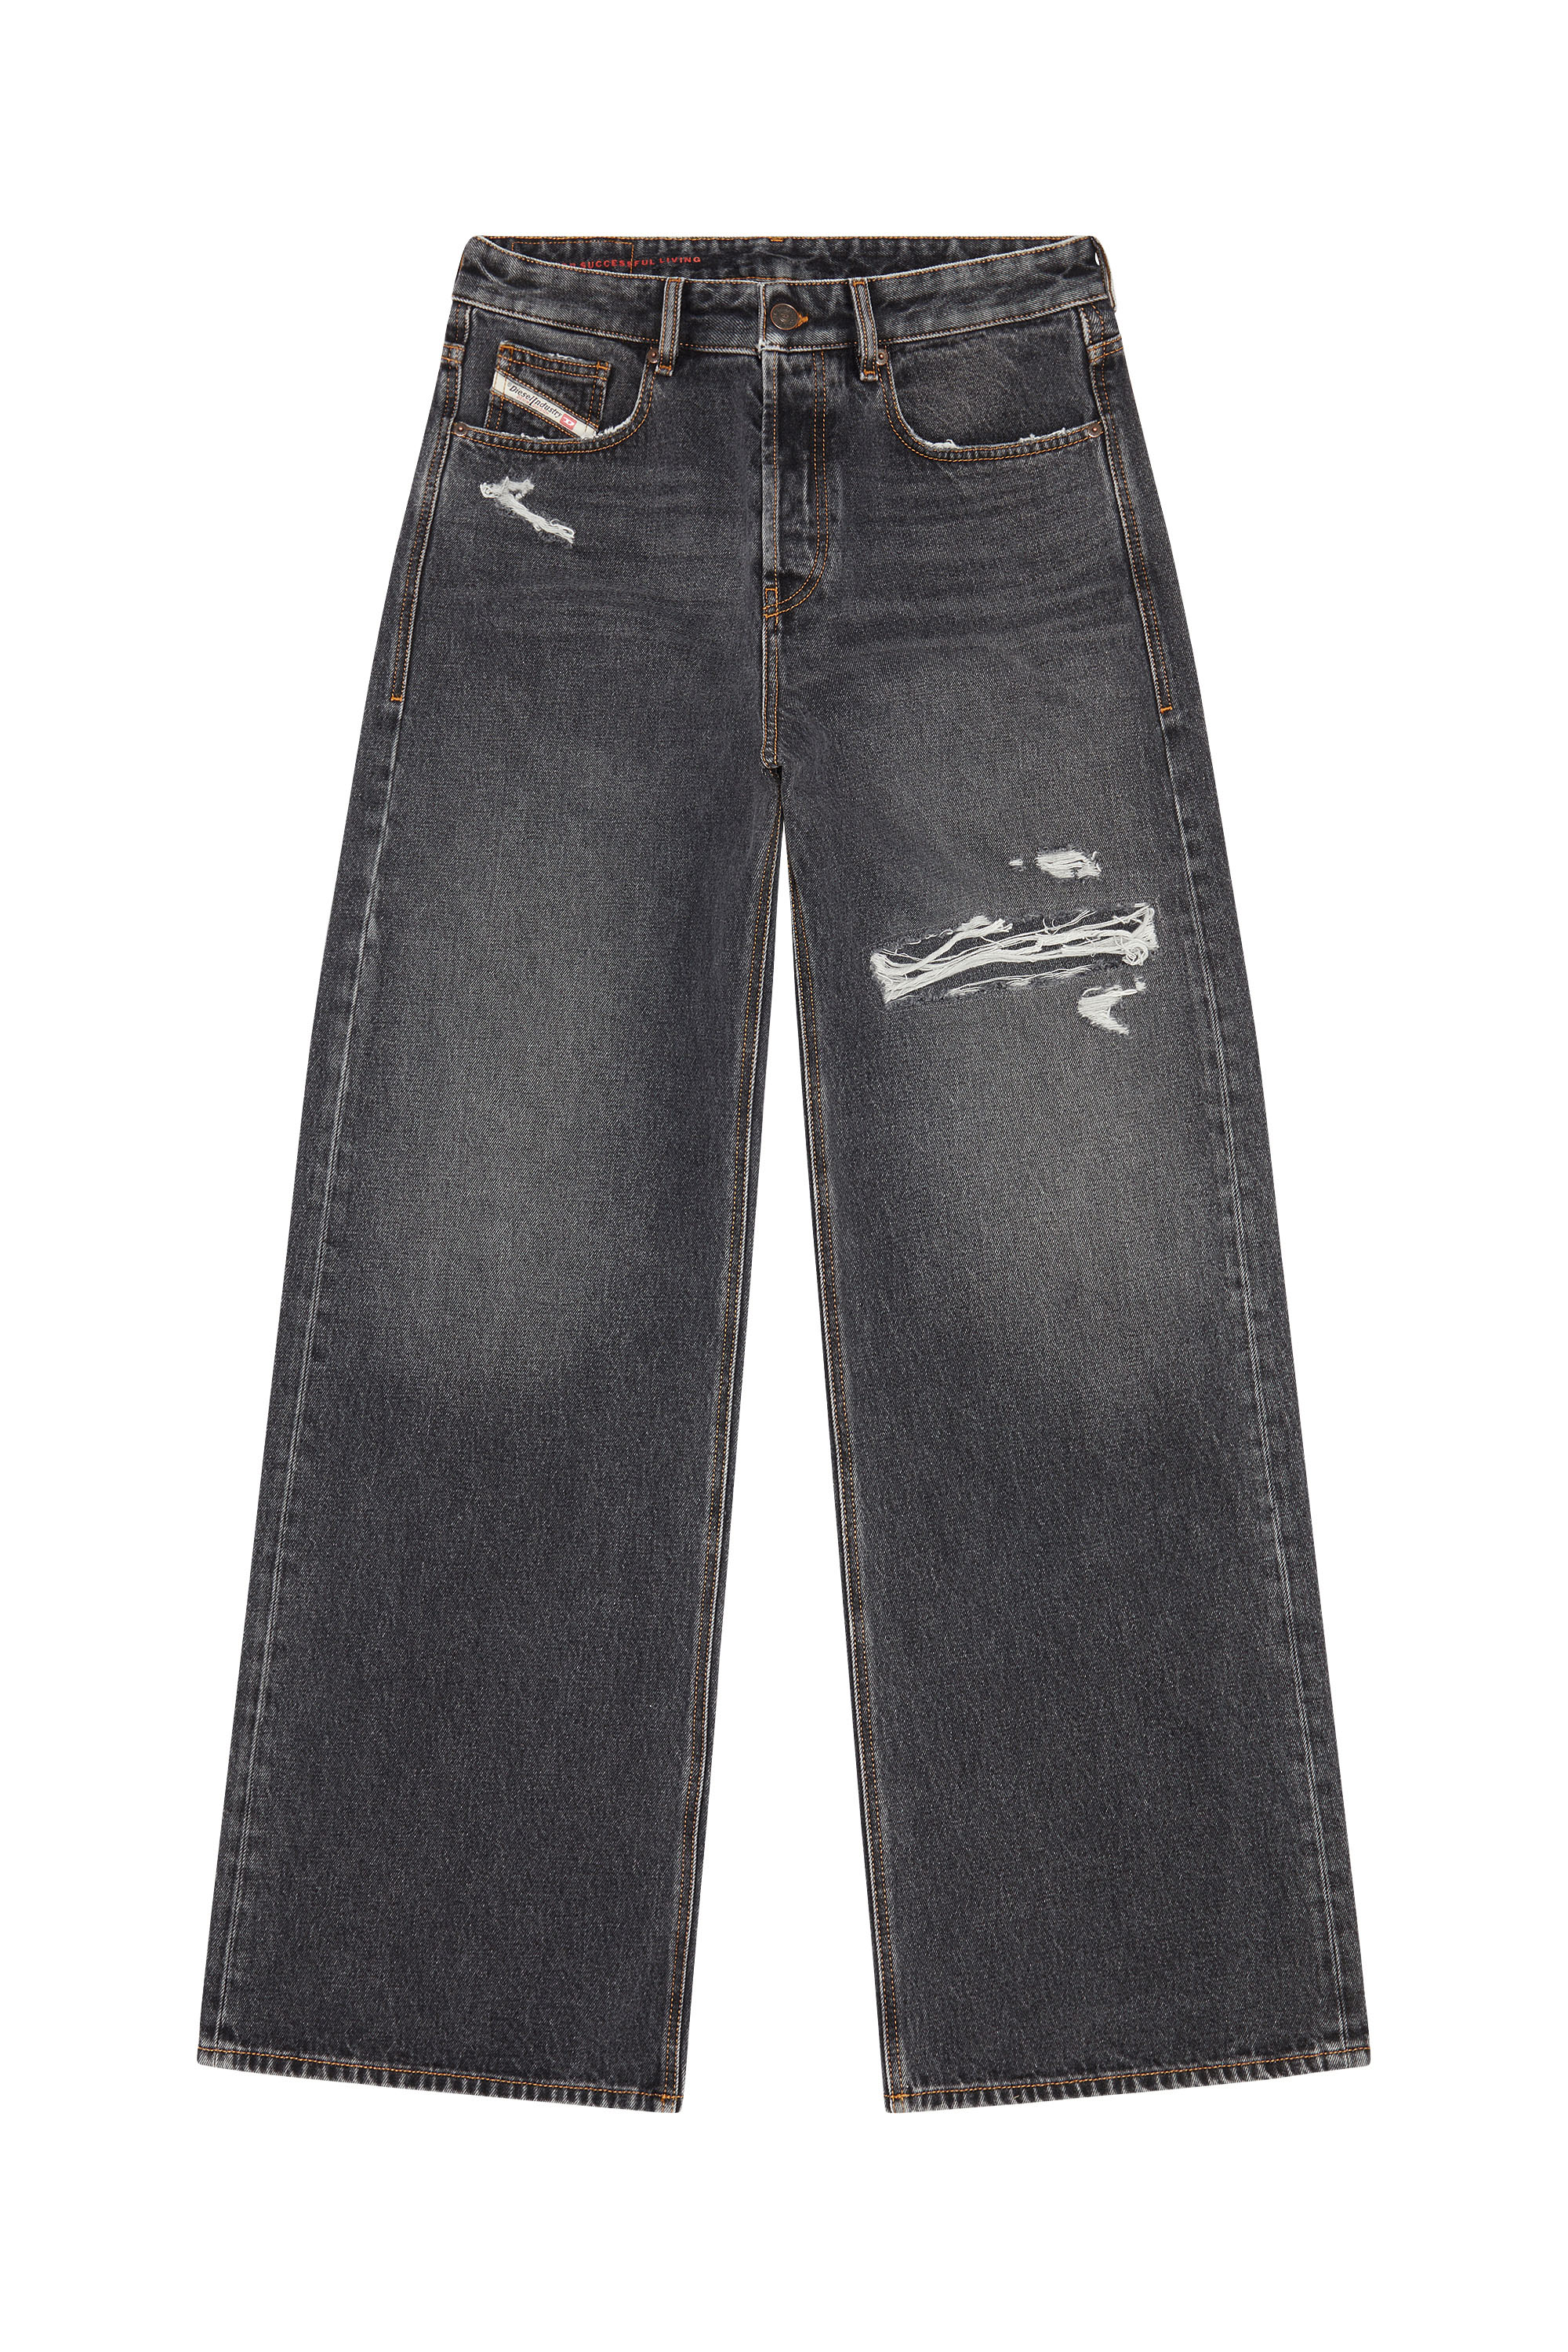 Diesel - Straight Jeans D-Rise 007F6, Hombre Straight Jeans - D-Rise in Negro - Image 5